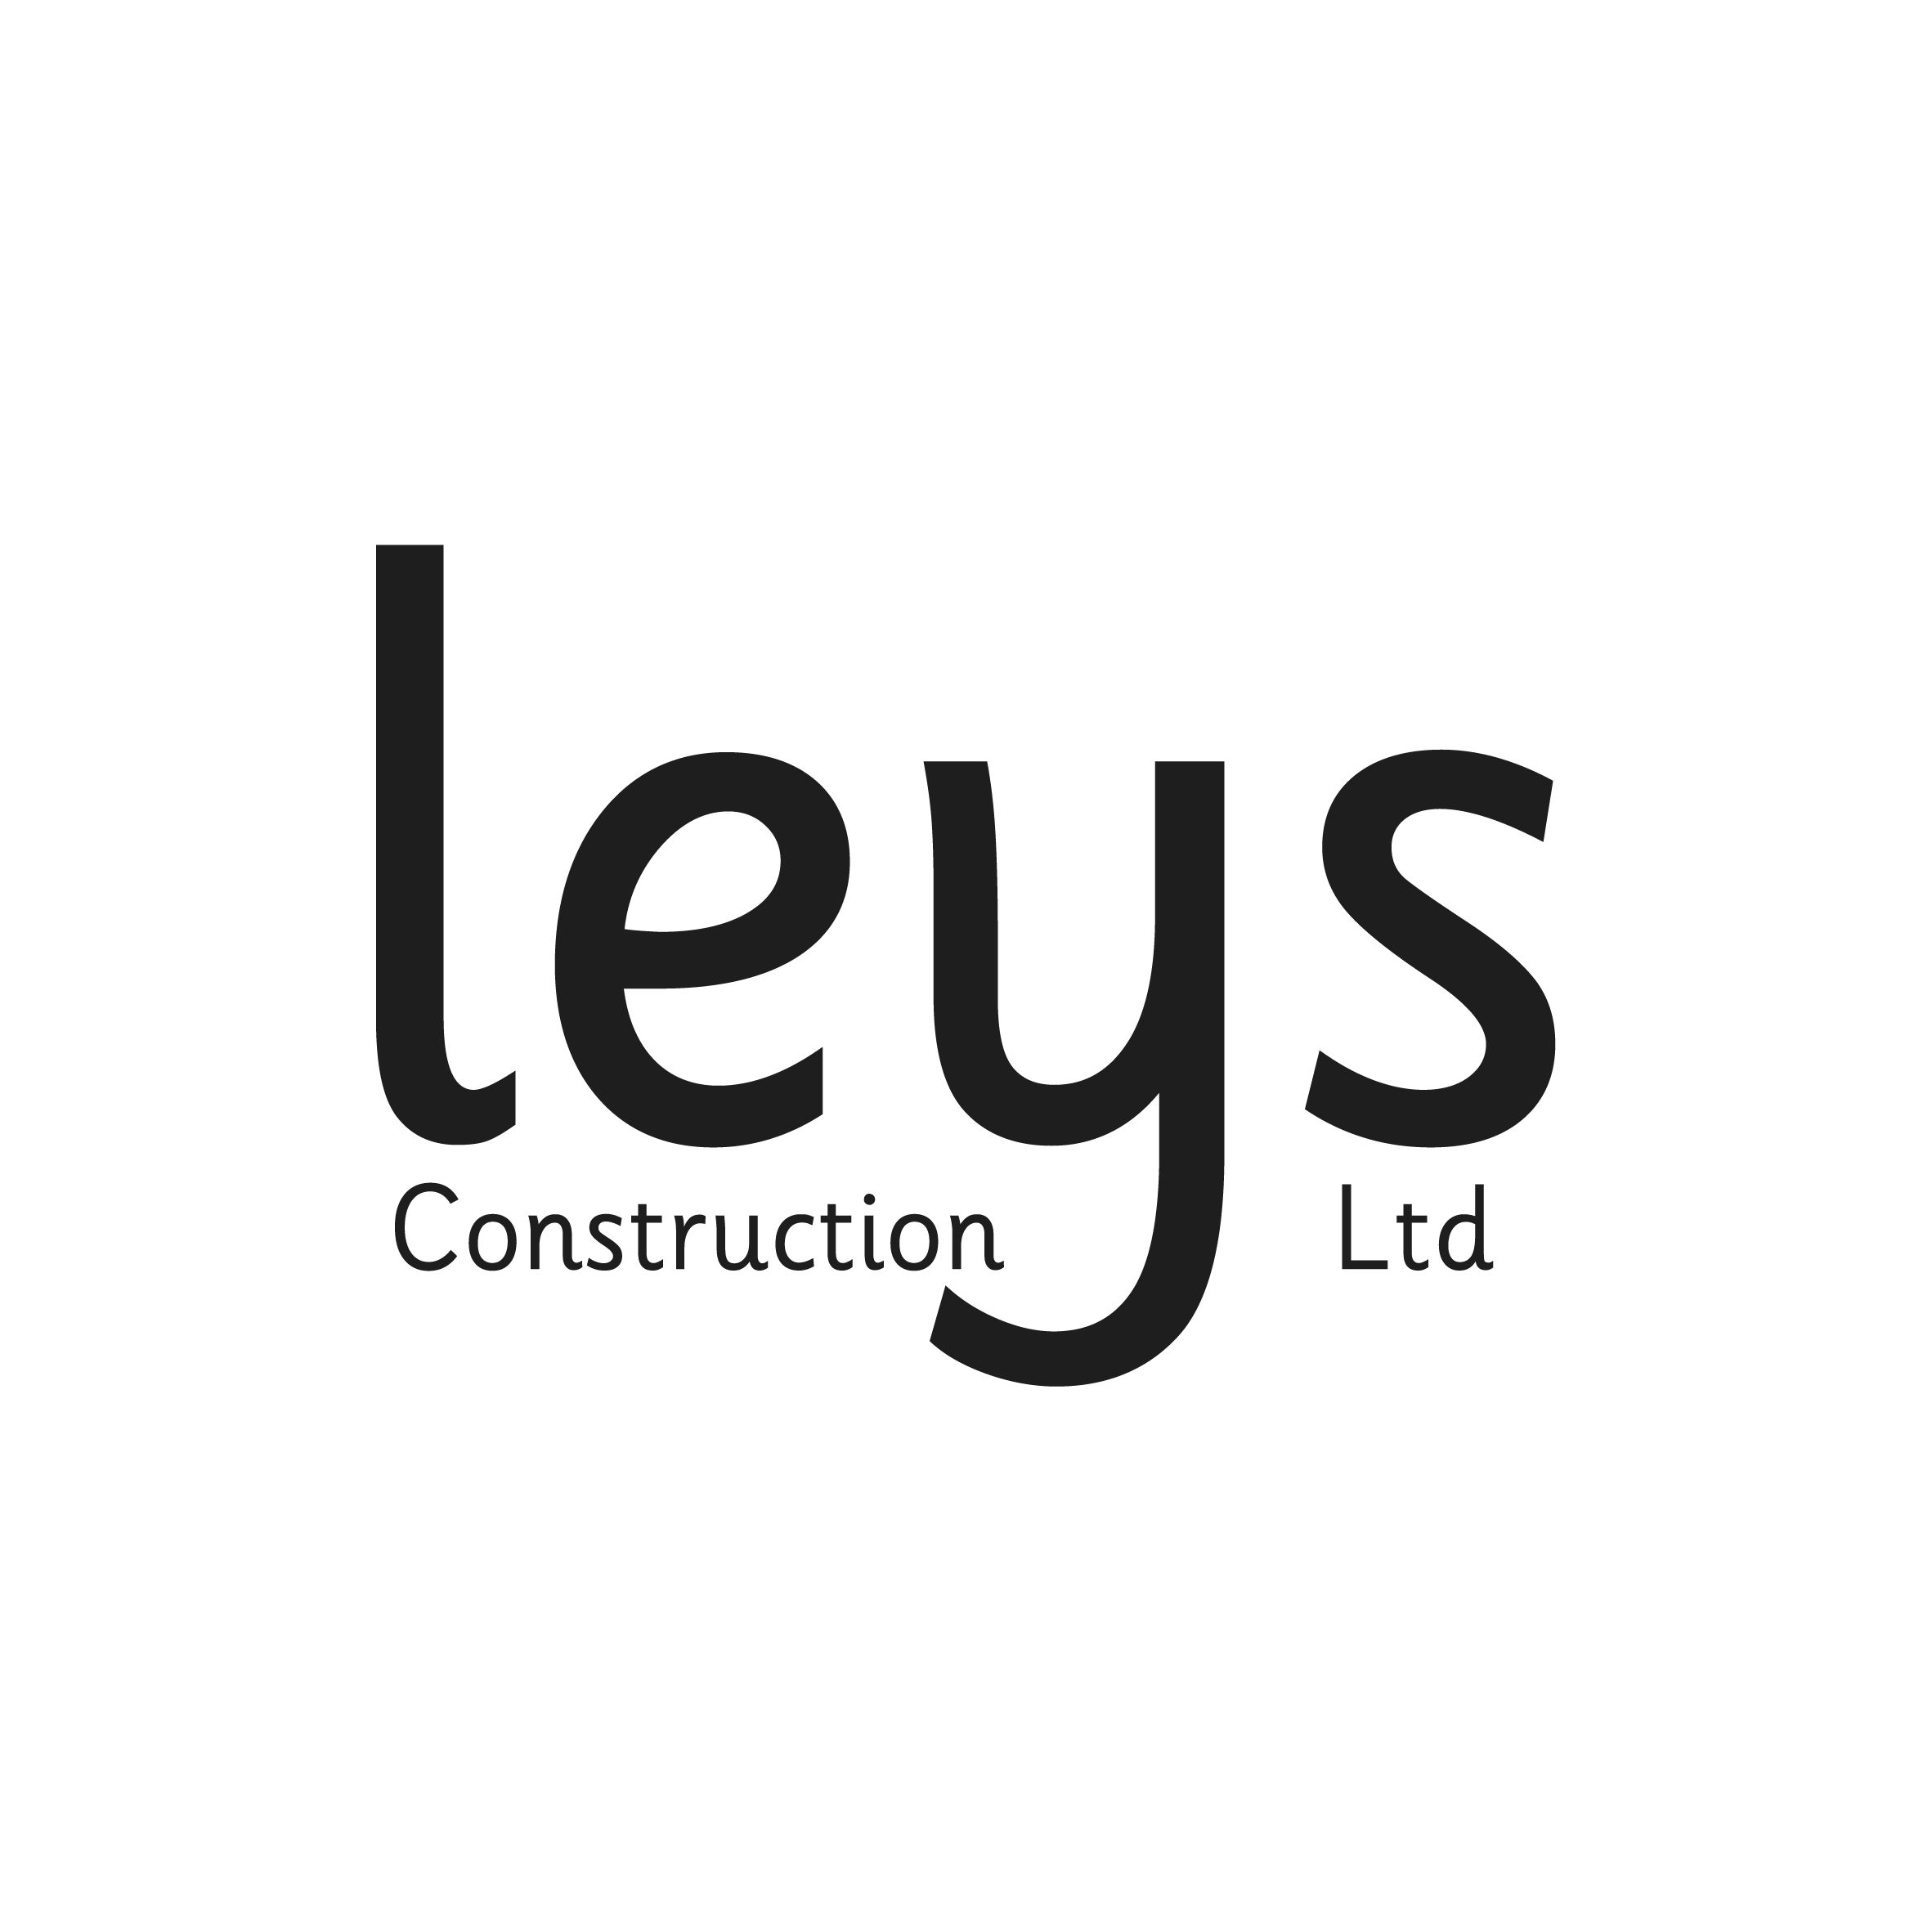 Leys Construction Limited